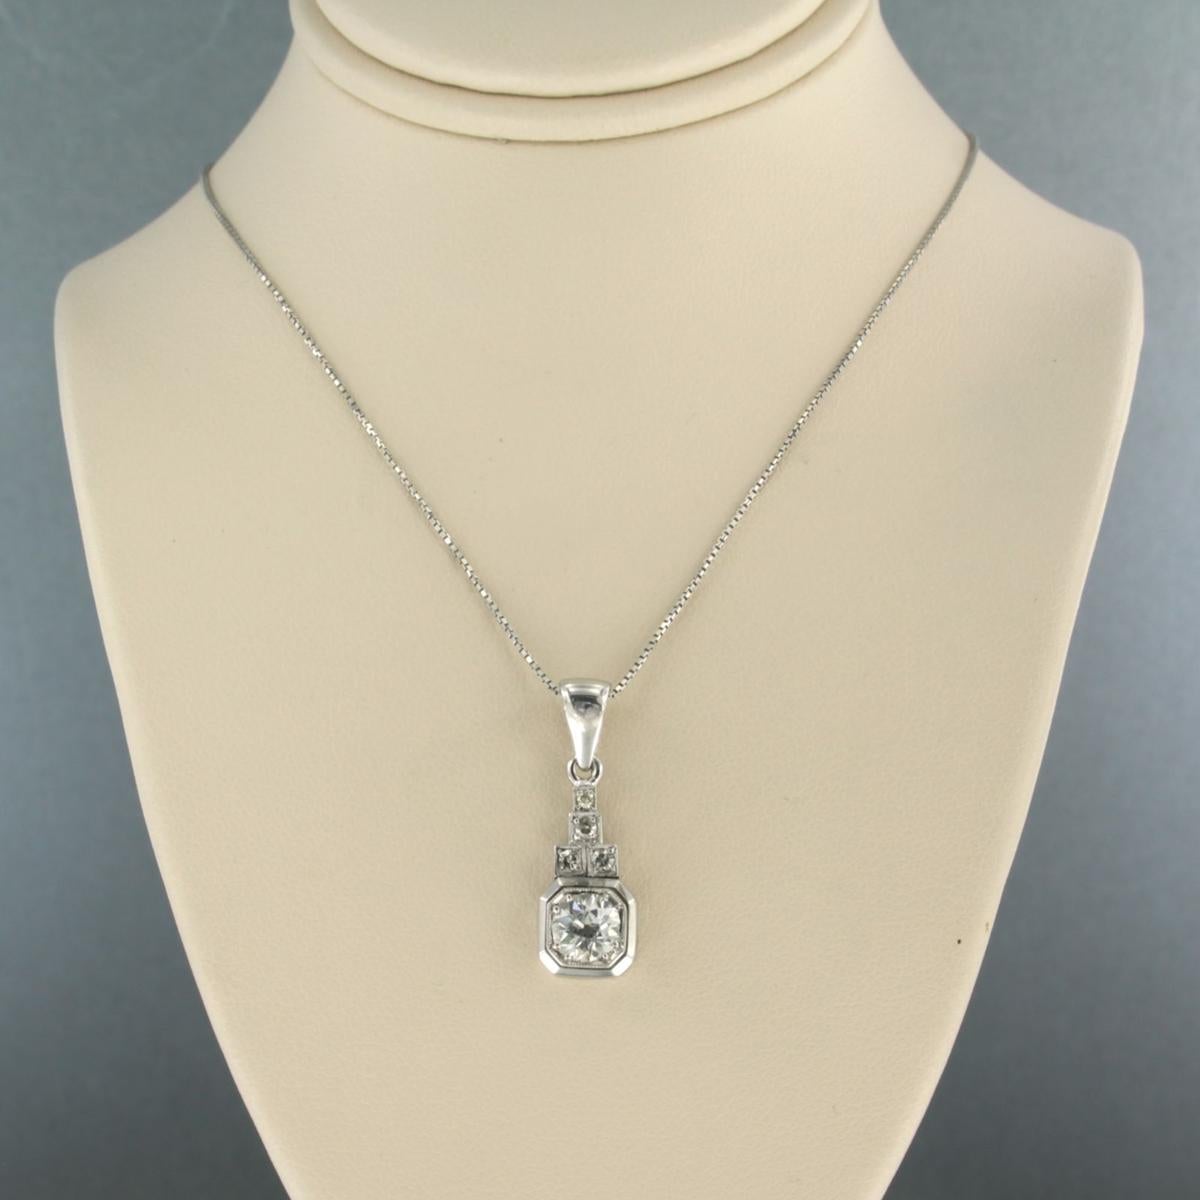 18k white gold necklace with pendant set with old European cut diamonds and single cut diamonds up to. 0.75ct - F/G - VS/SI - 45 cm long

detailed description:

the necklace is 45 cm long and 0.8 mm wide

the pendant is 2.4 cm long by 8.3 mm